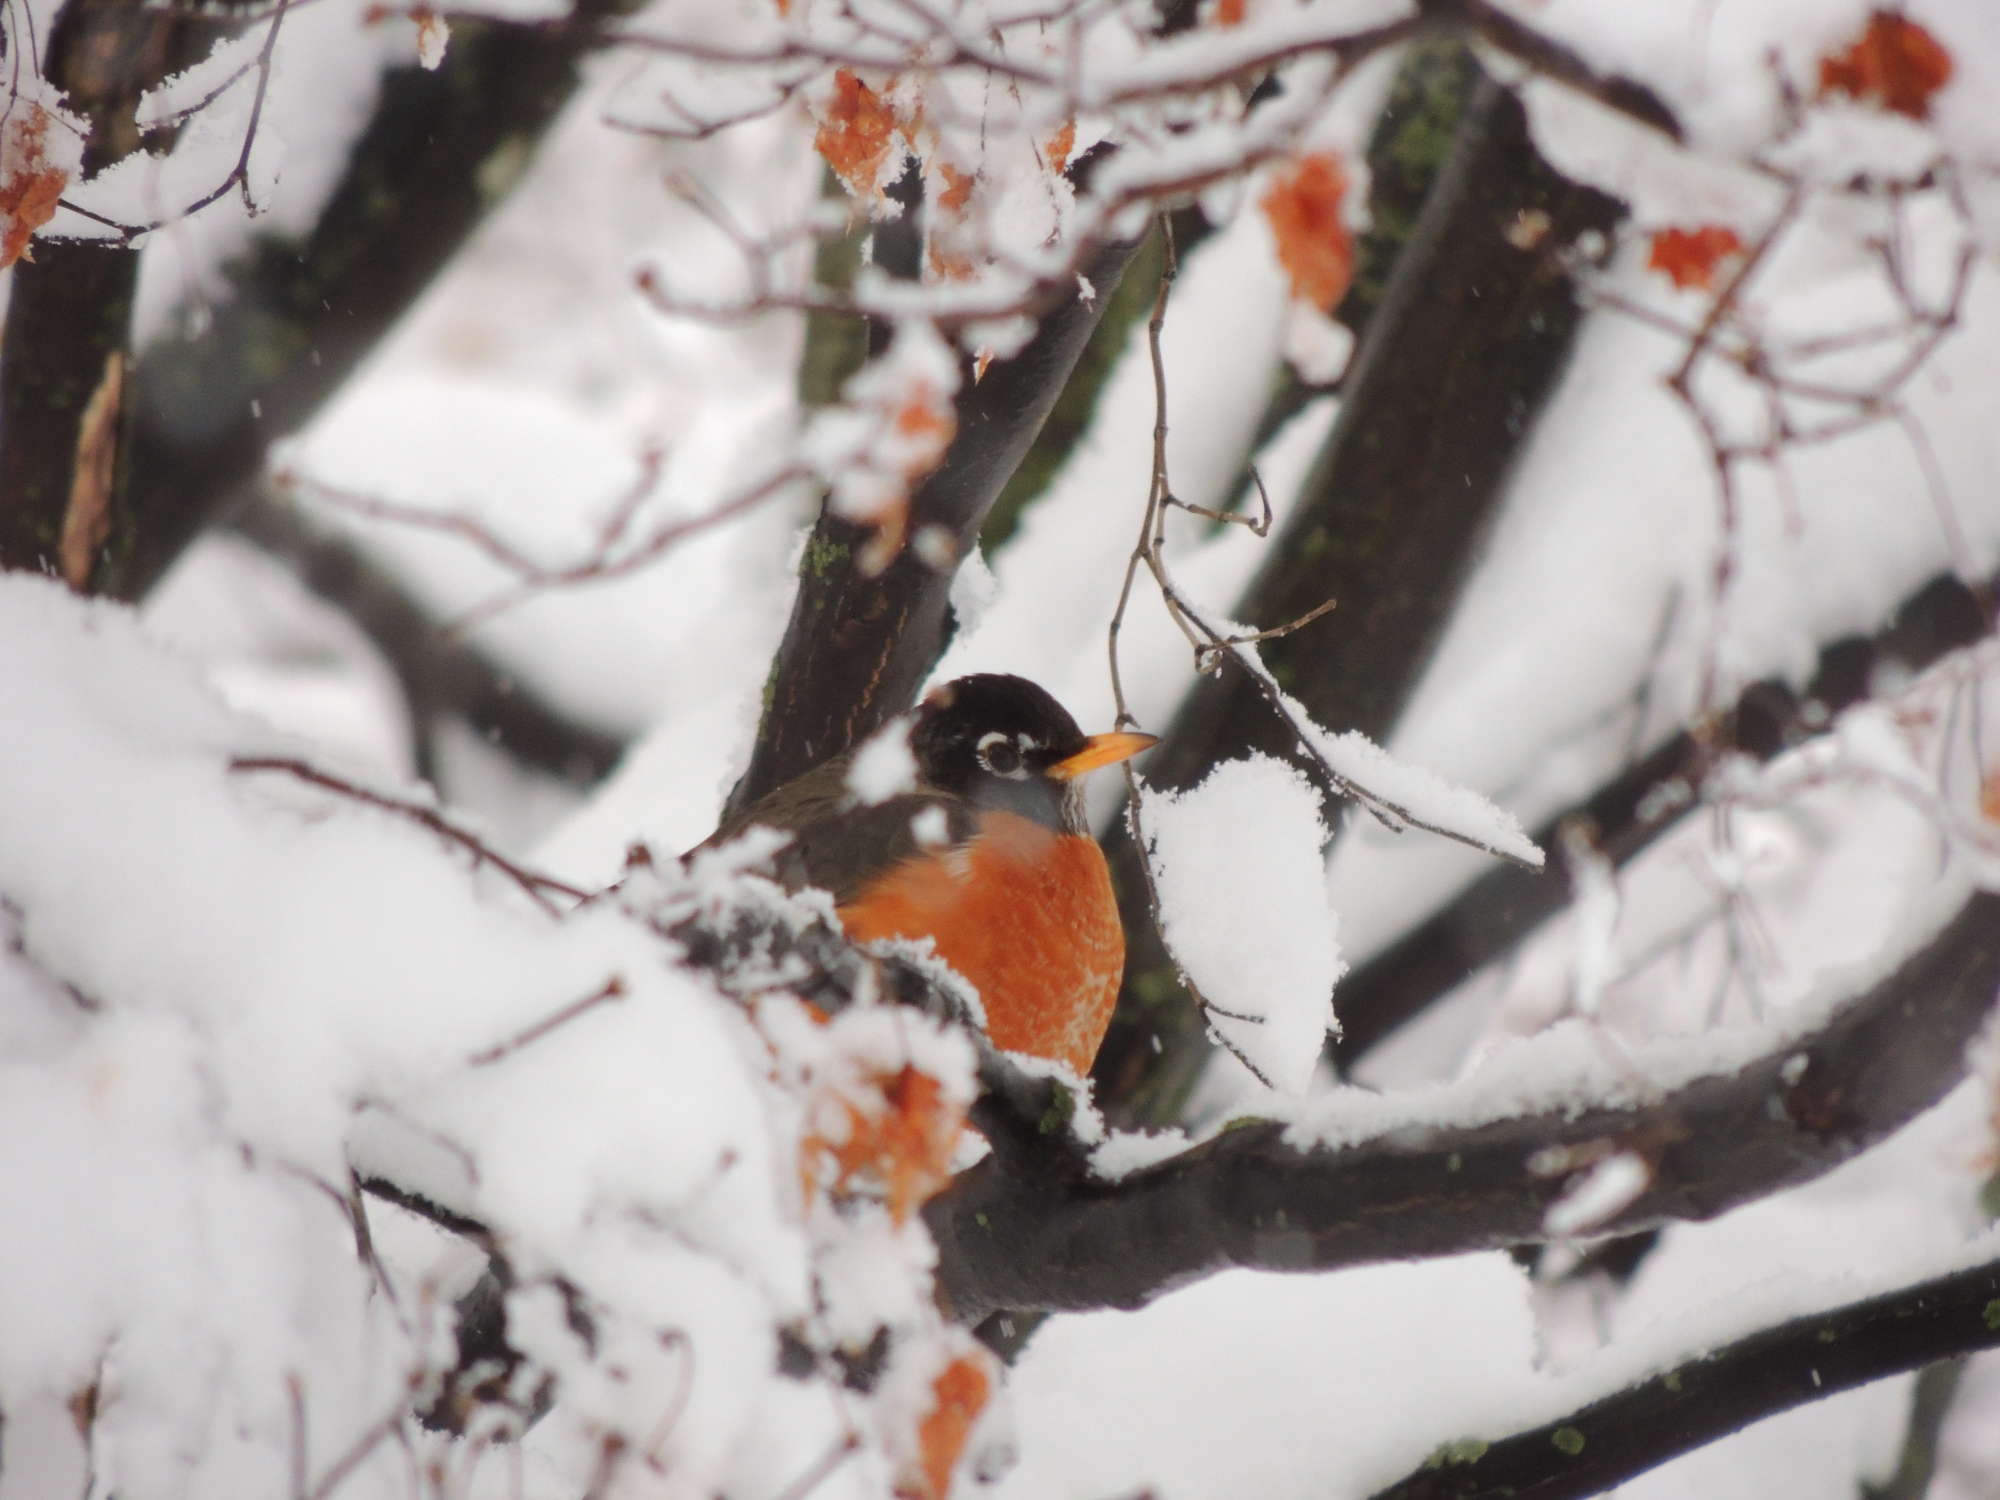 While they are thought of as the Bringers of Spring, Robins may actually stick around even during the winter!